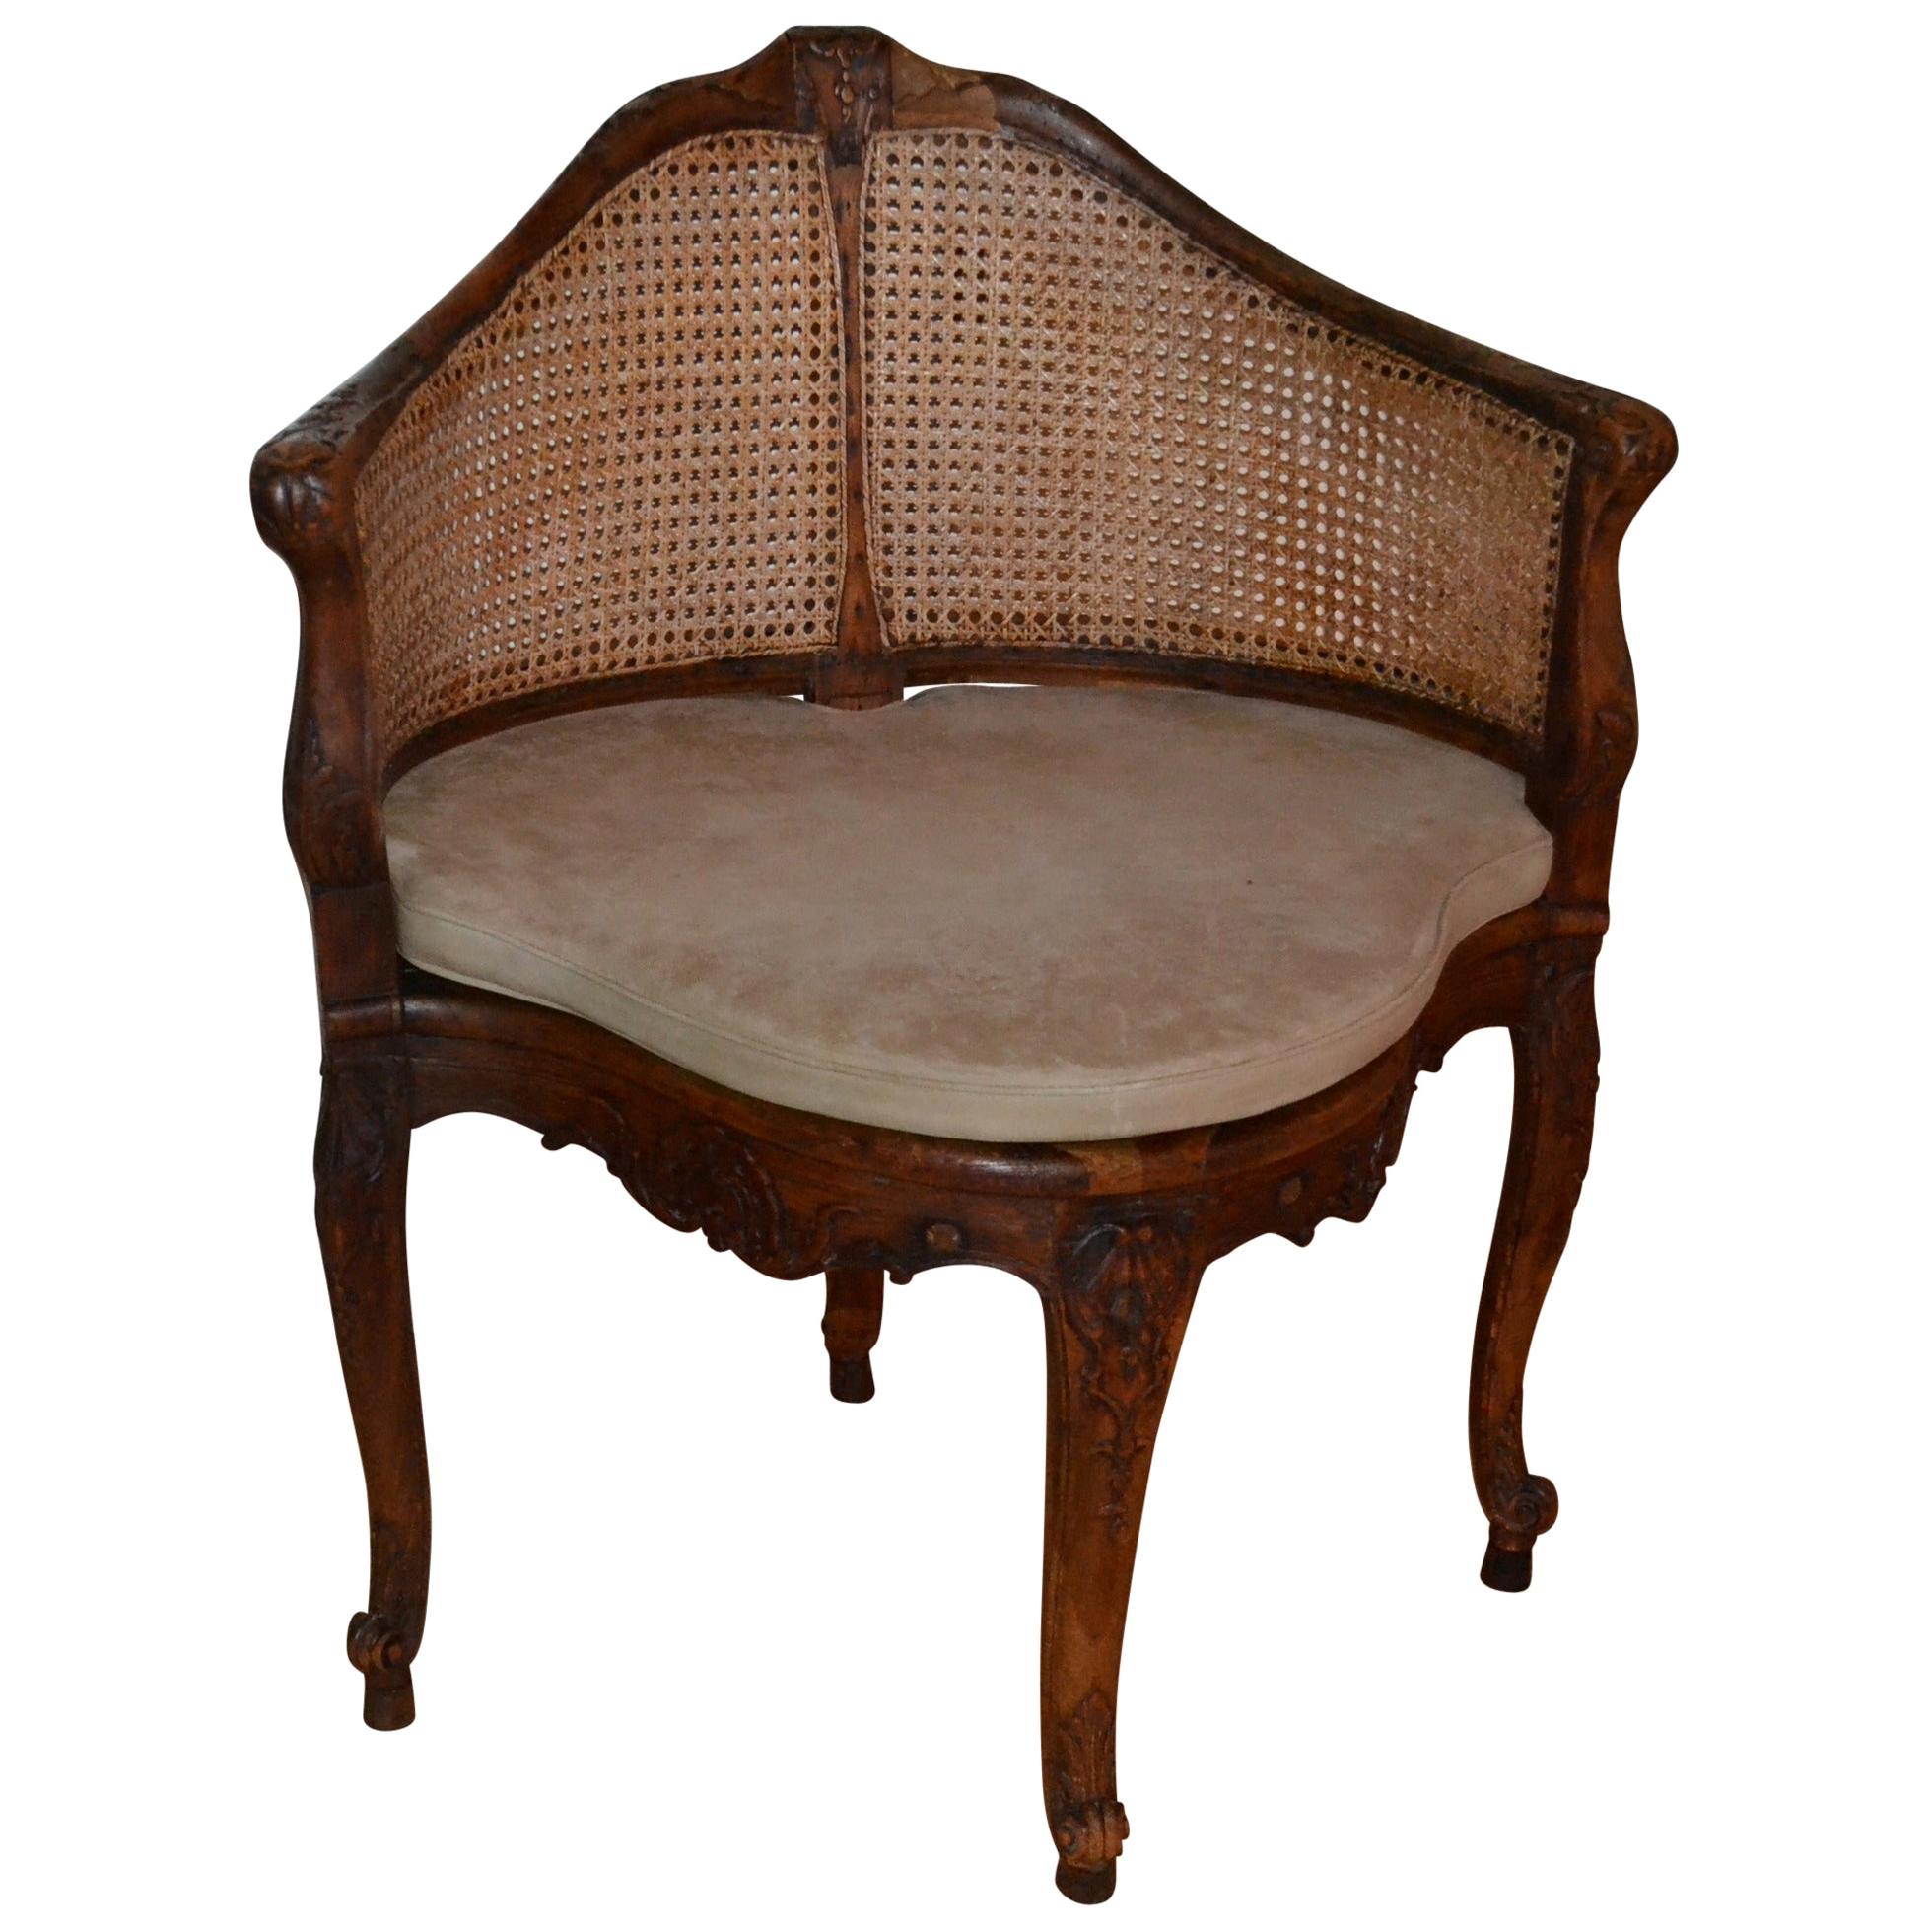 18th Century French walnut corner caned chair with a thin parchment colored leather pillow.
  